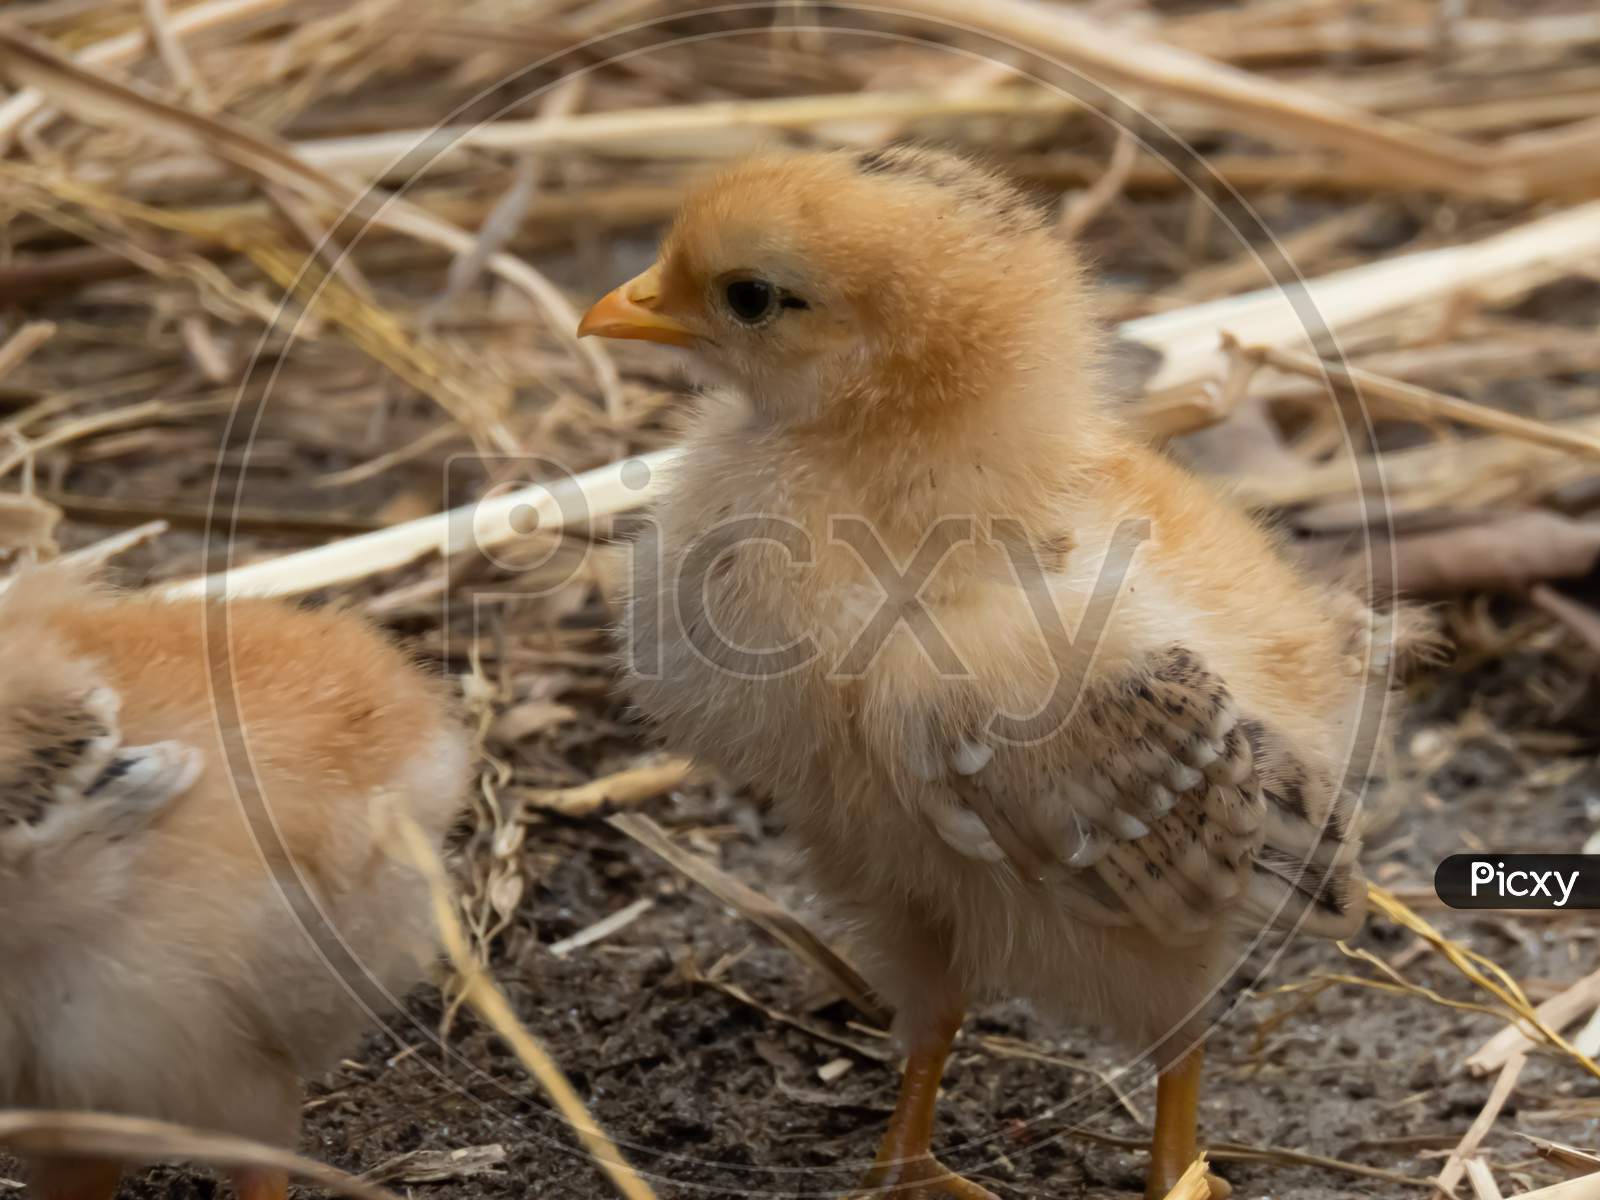 Image Of Little Chicks Walking Around For Food.